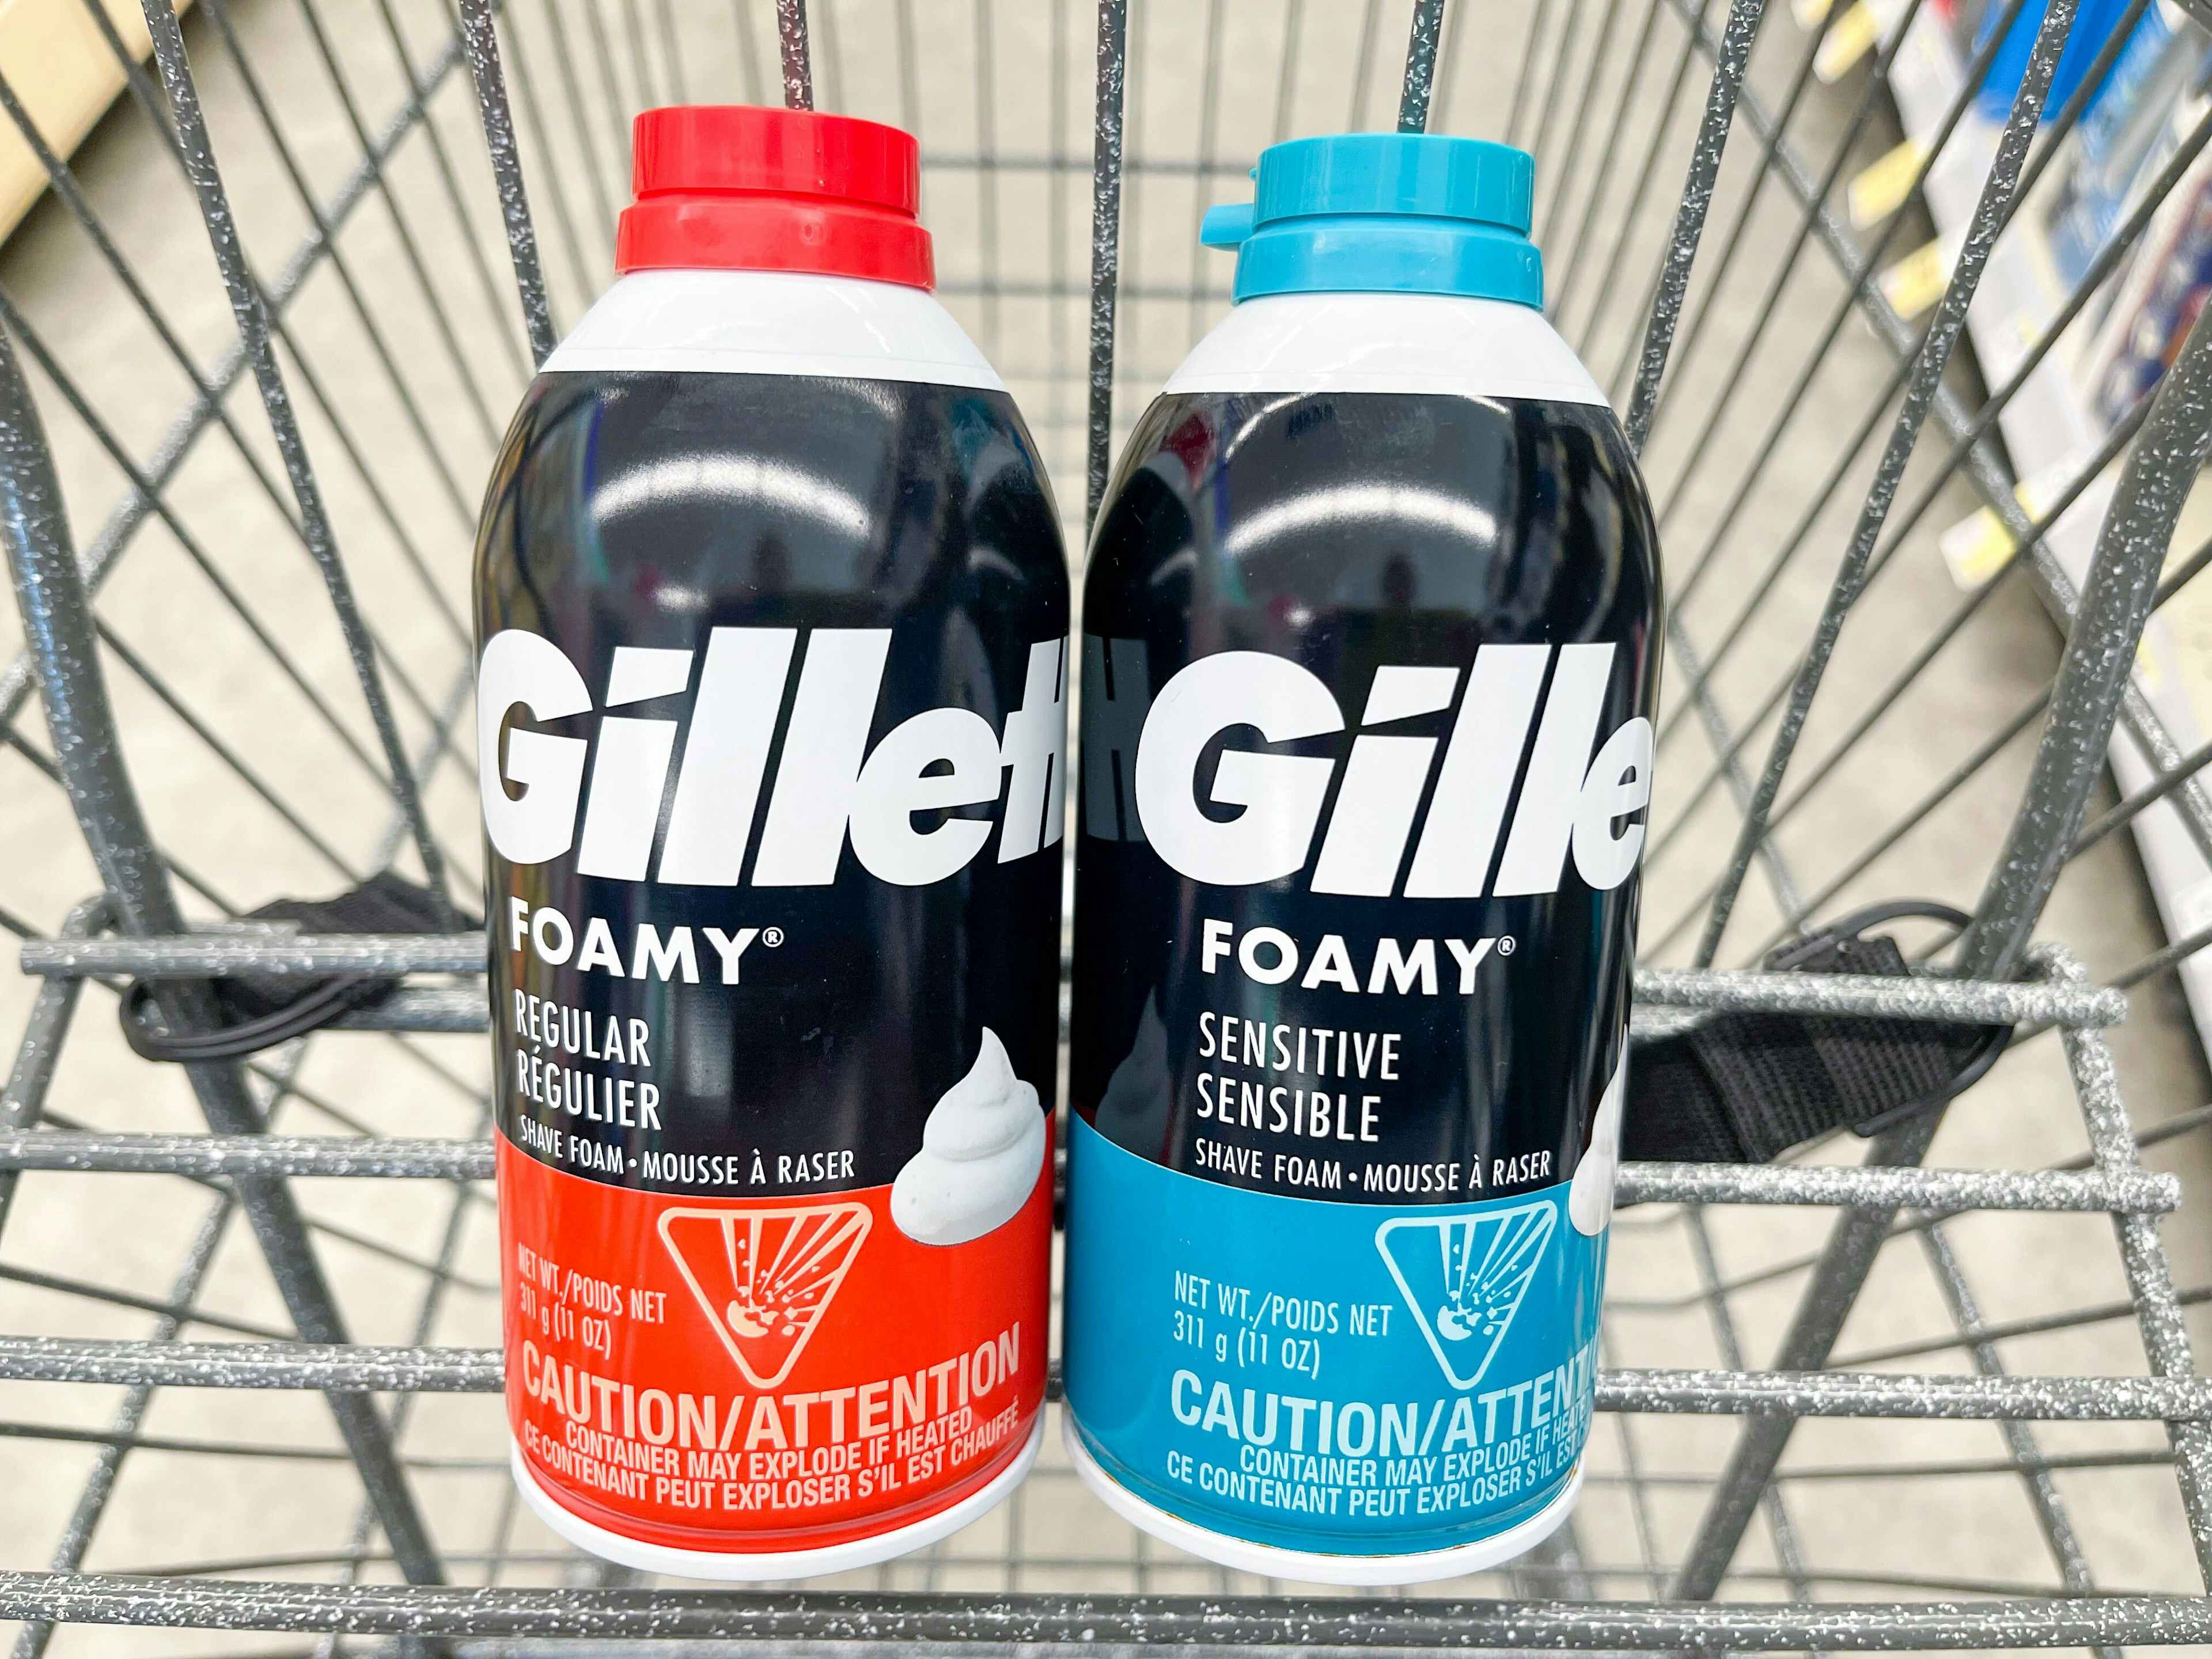 A couple cans of Gillette shaving cream sitting in a store cart.